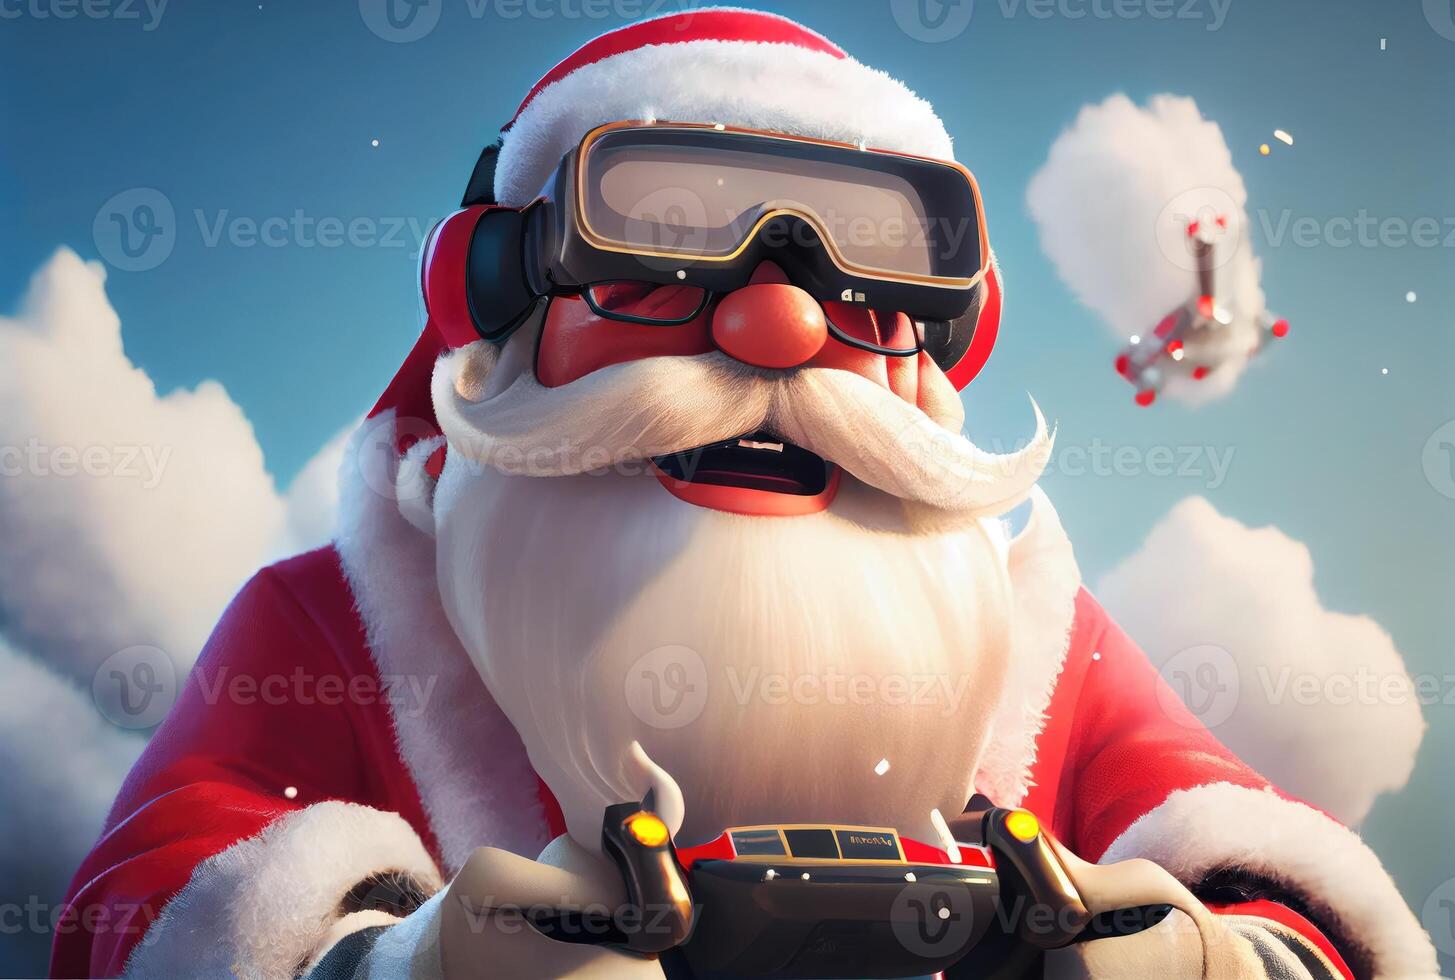 Closeup of Santa Claus controlling the flying drone with remote control in the blue sky and cloudy background. Merry Christmas and Happy new year concept. Digital art illustration. photo